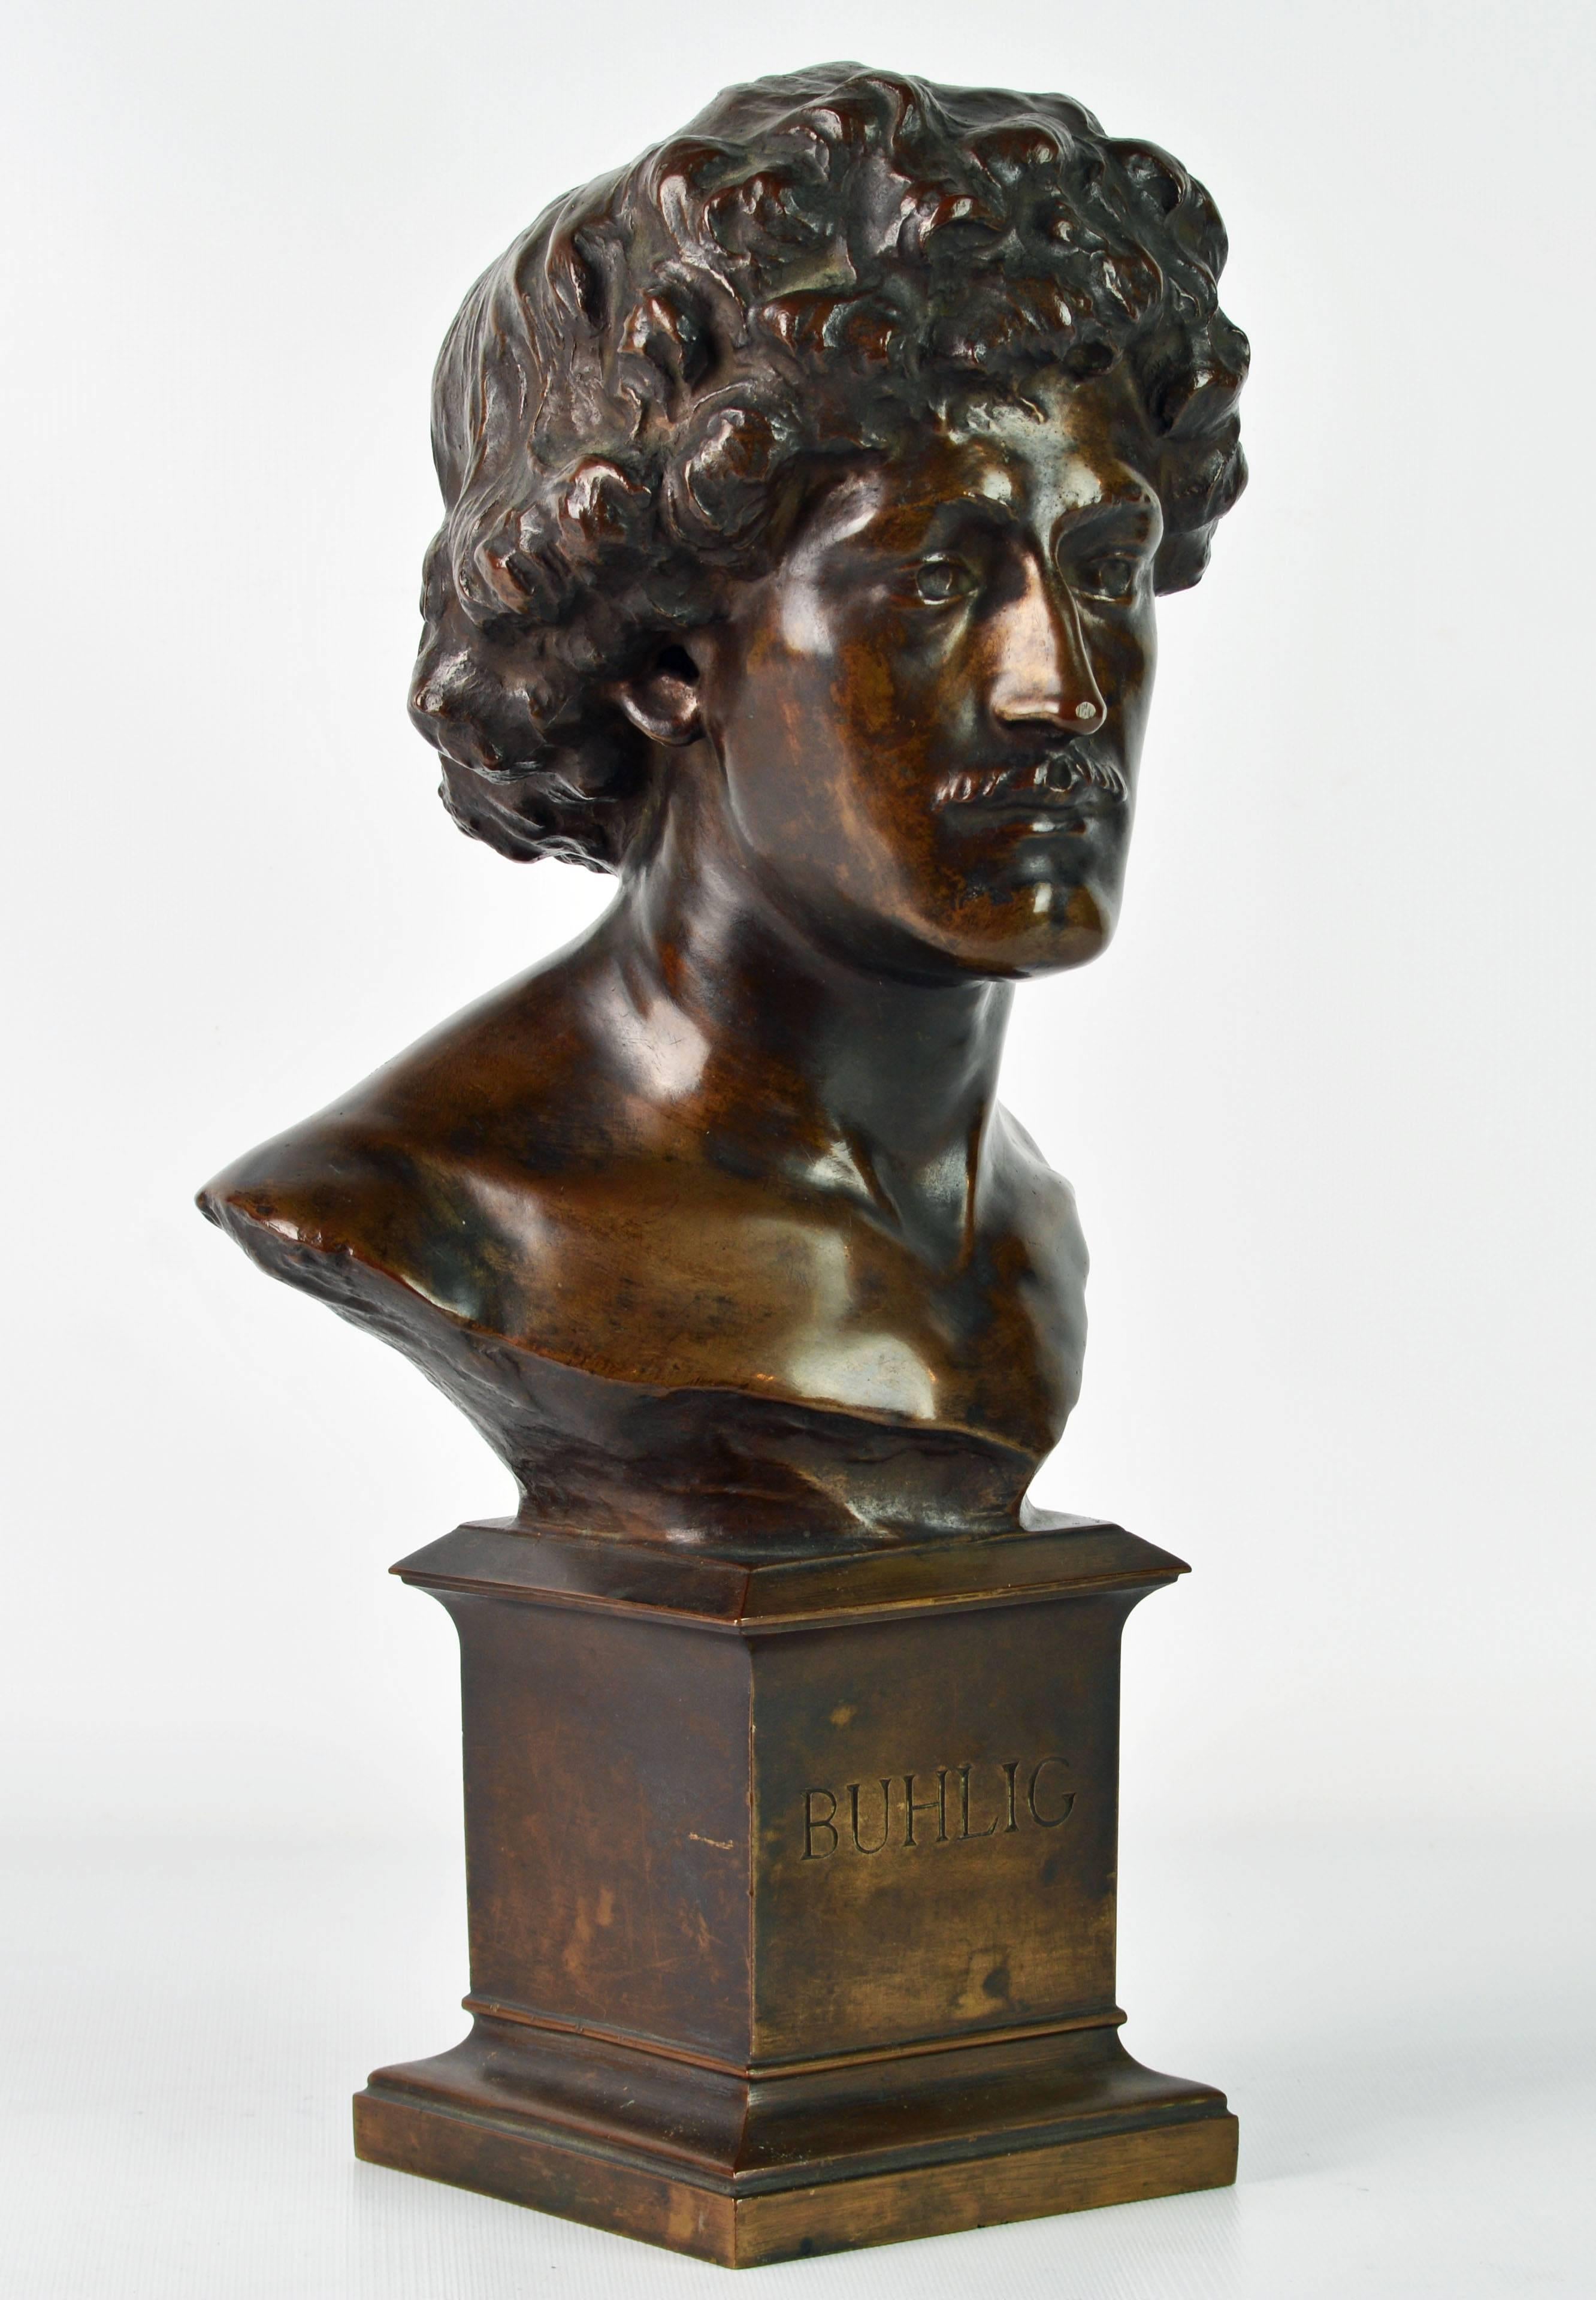 Richard Buhlig (1880-1952) was born in Chicago to German immigrant parents. He studied in the US as well as in Europe and became a highly regarded pianist with a superior career both here and abroad. This fine and sensitive bronze bust by British